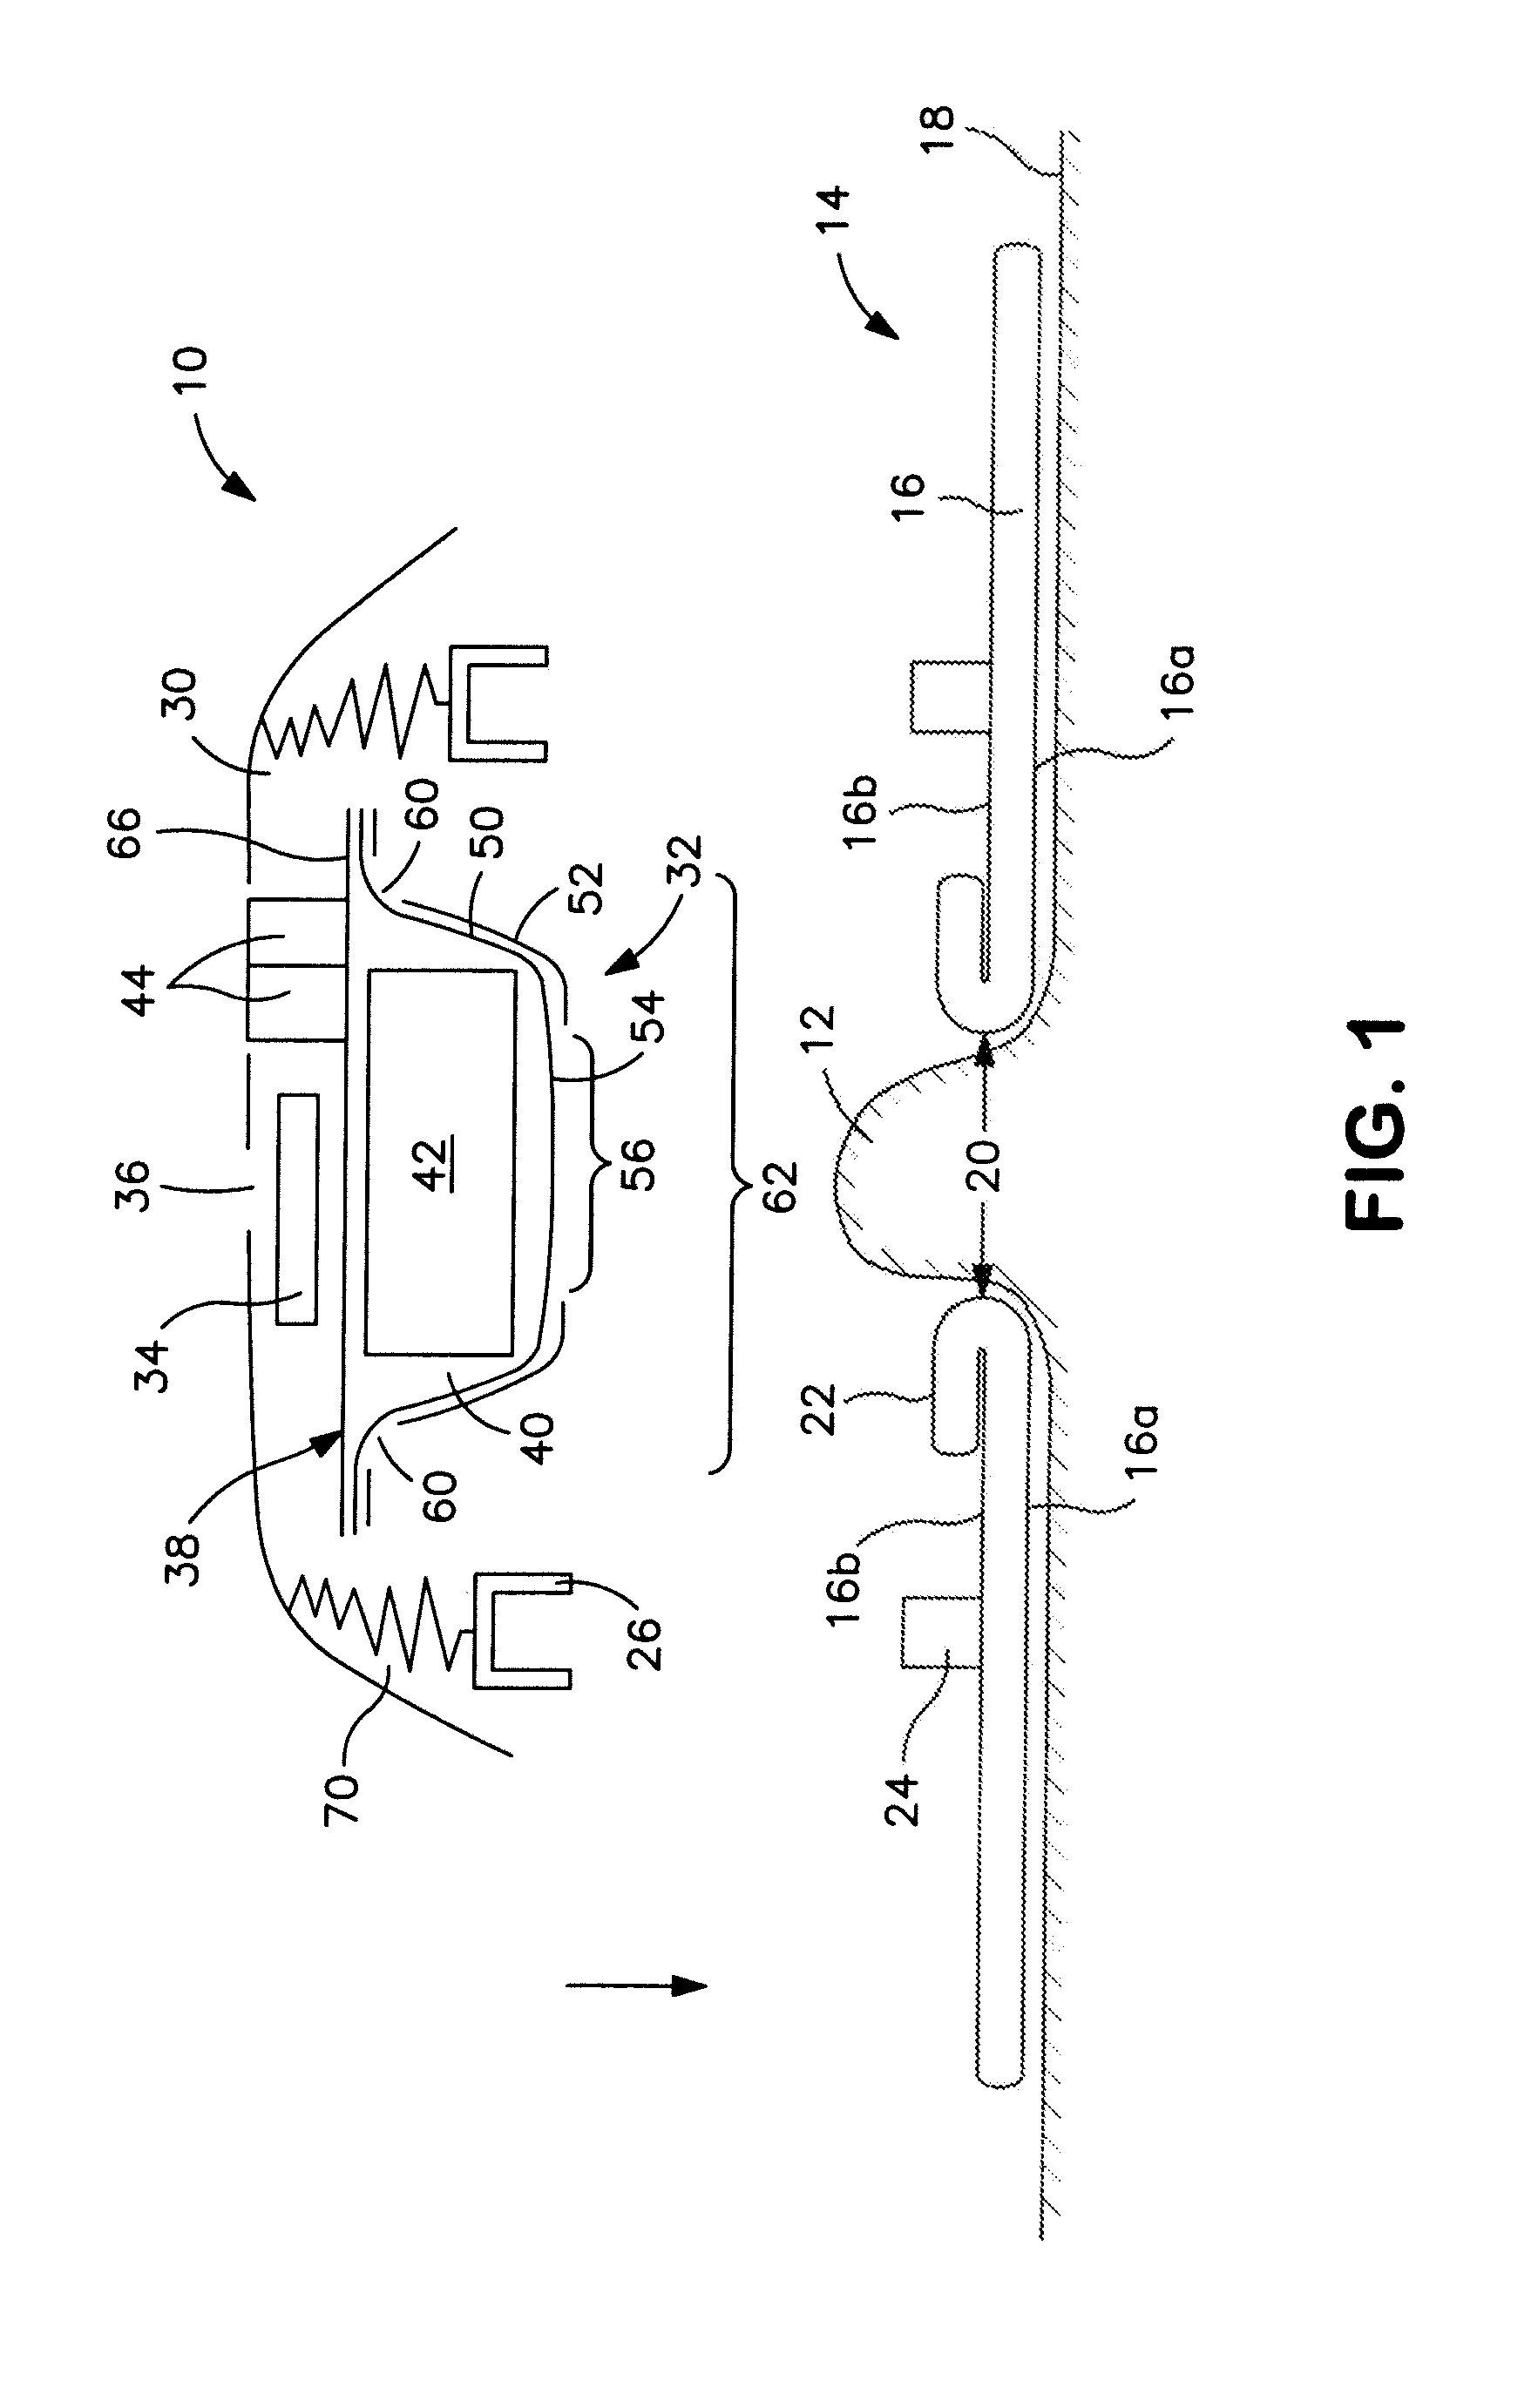 Controlled discharge ostomy appliance and moldable adhesive wafer